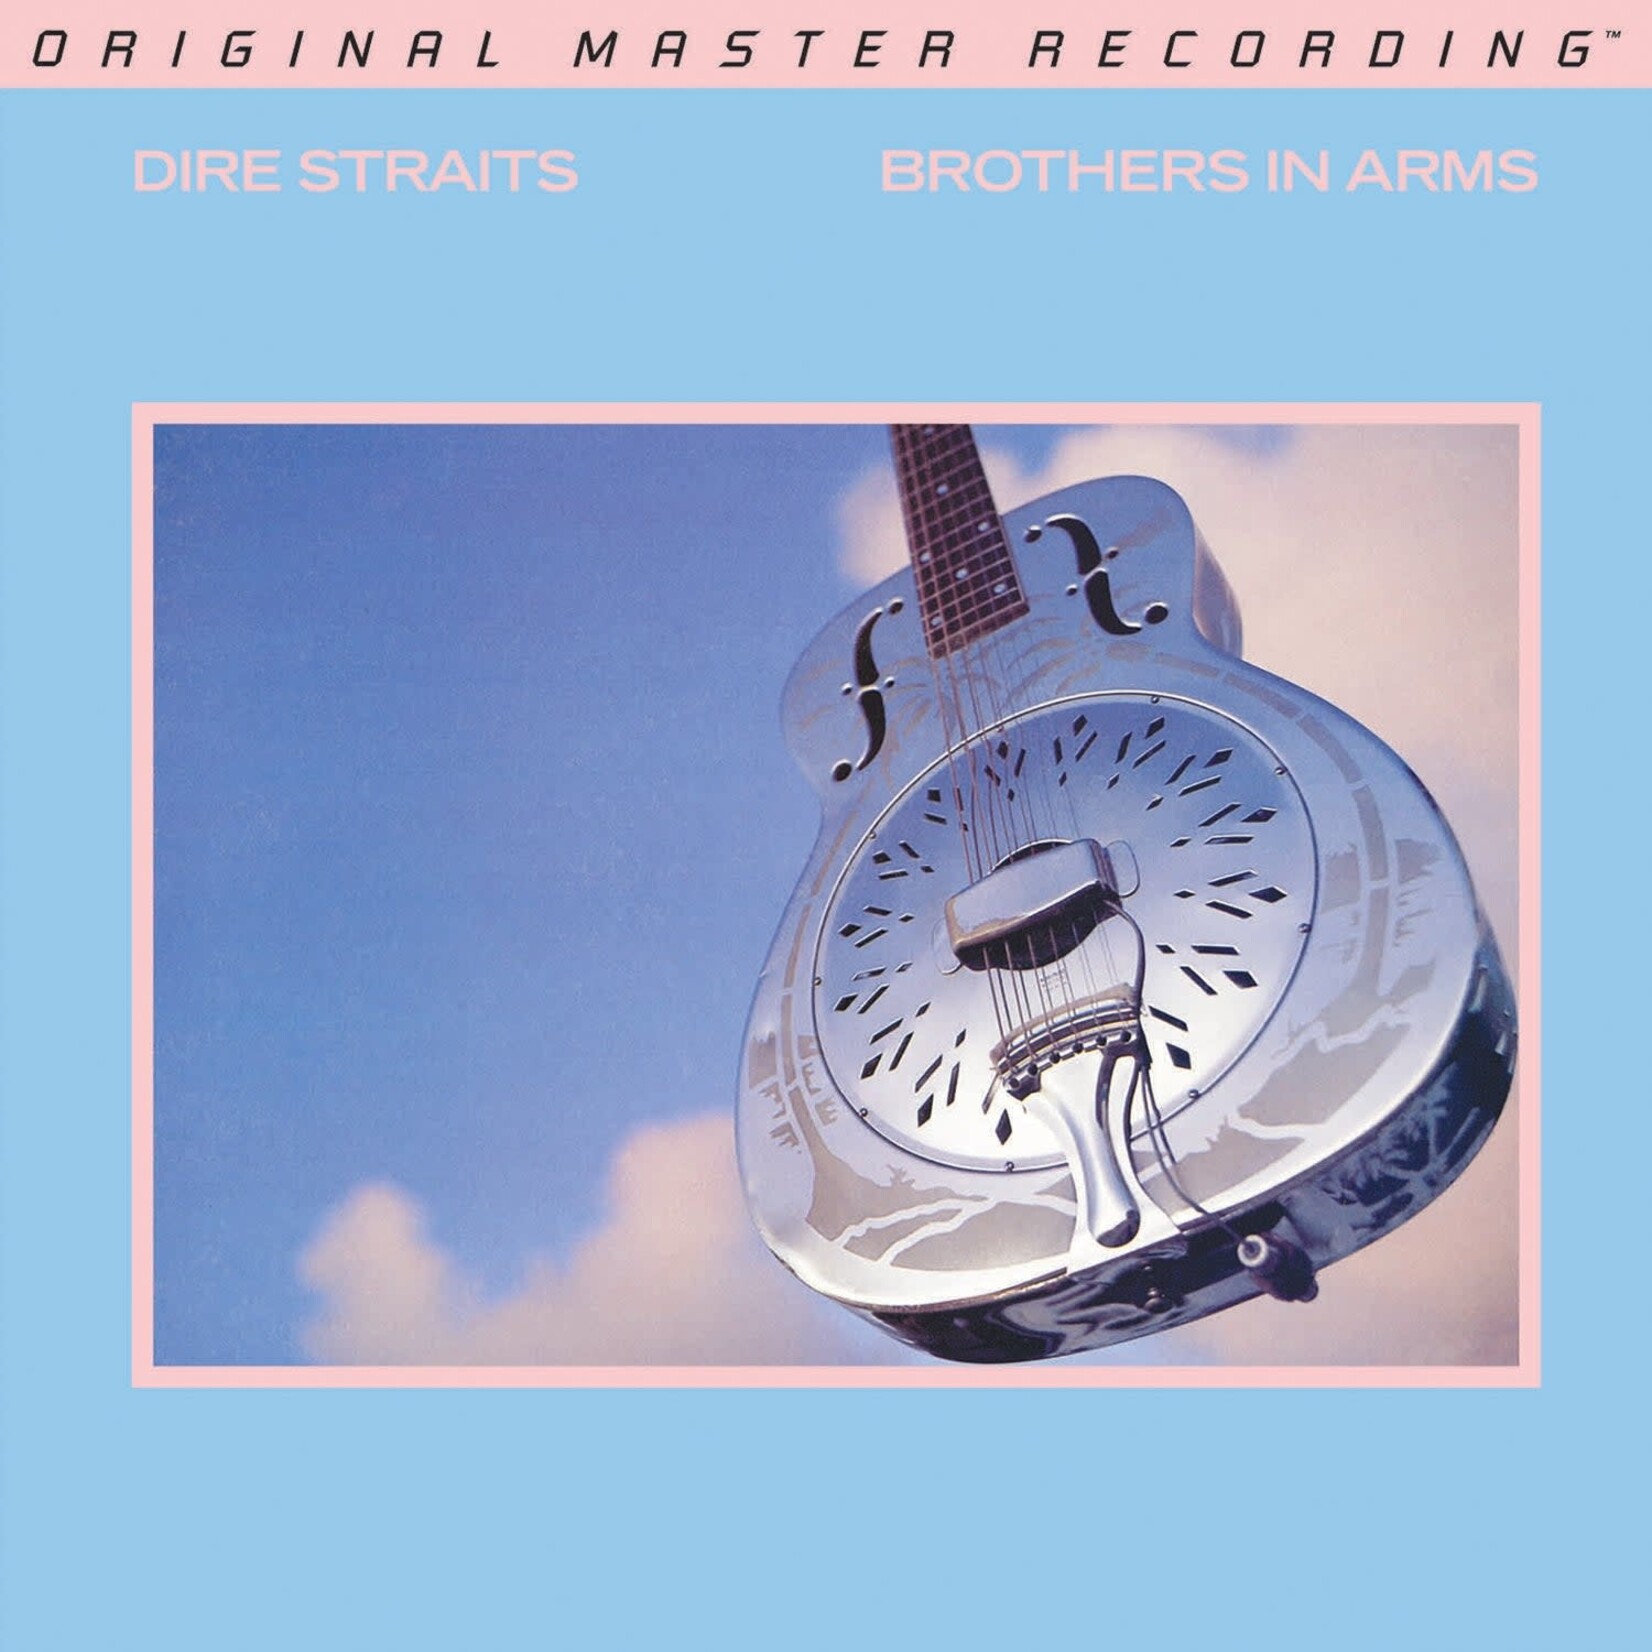 [Vintage] Dire Straits - Brothers In Arms (2LP, 45rpm)